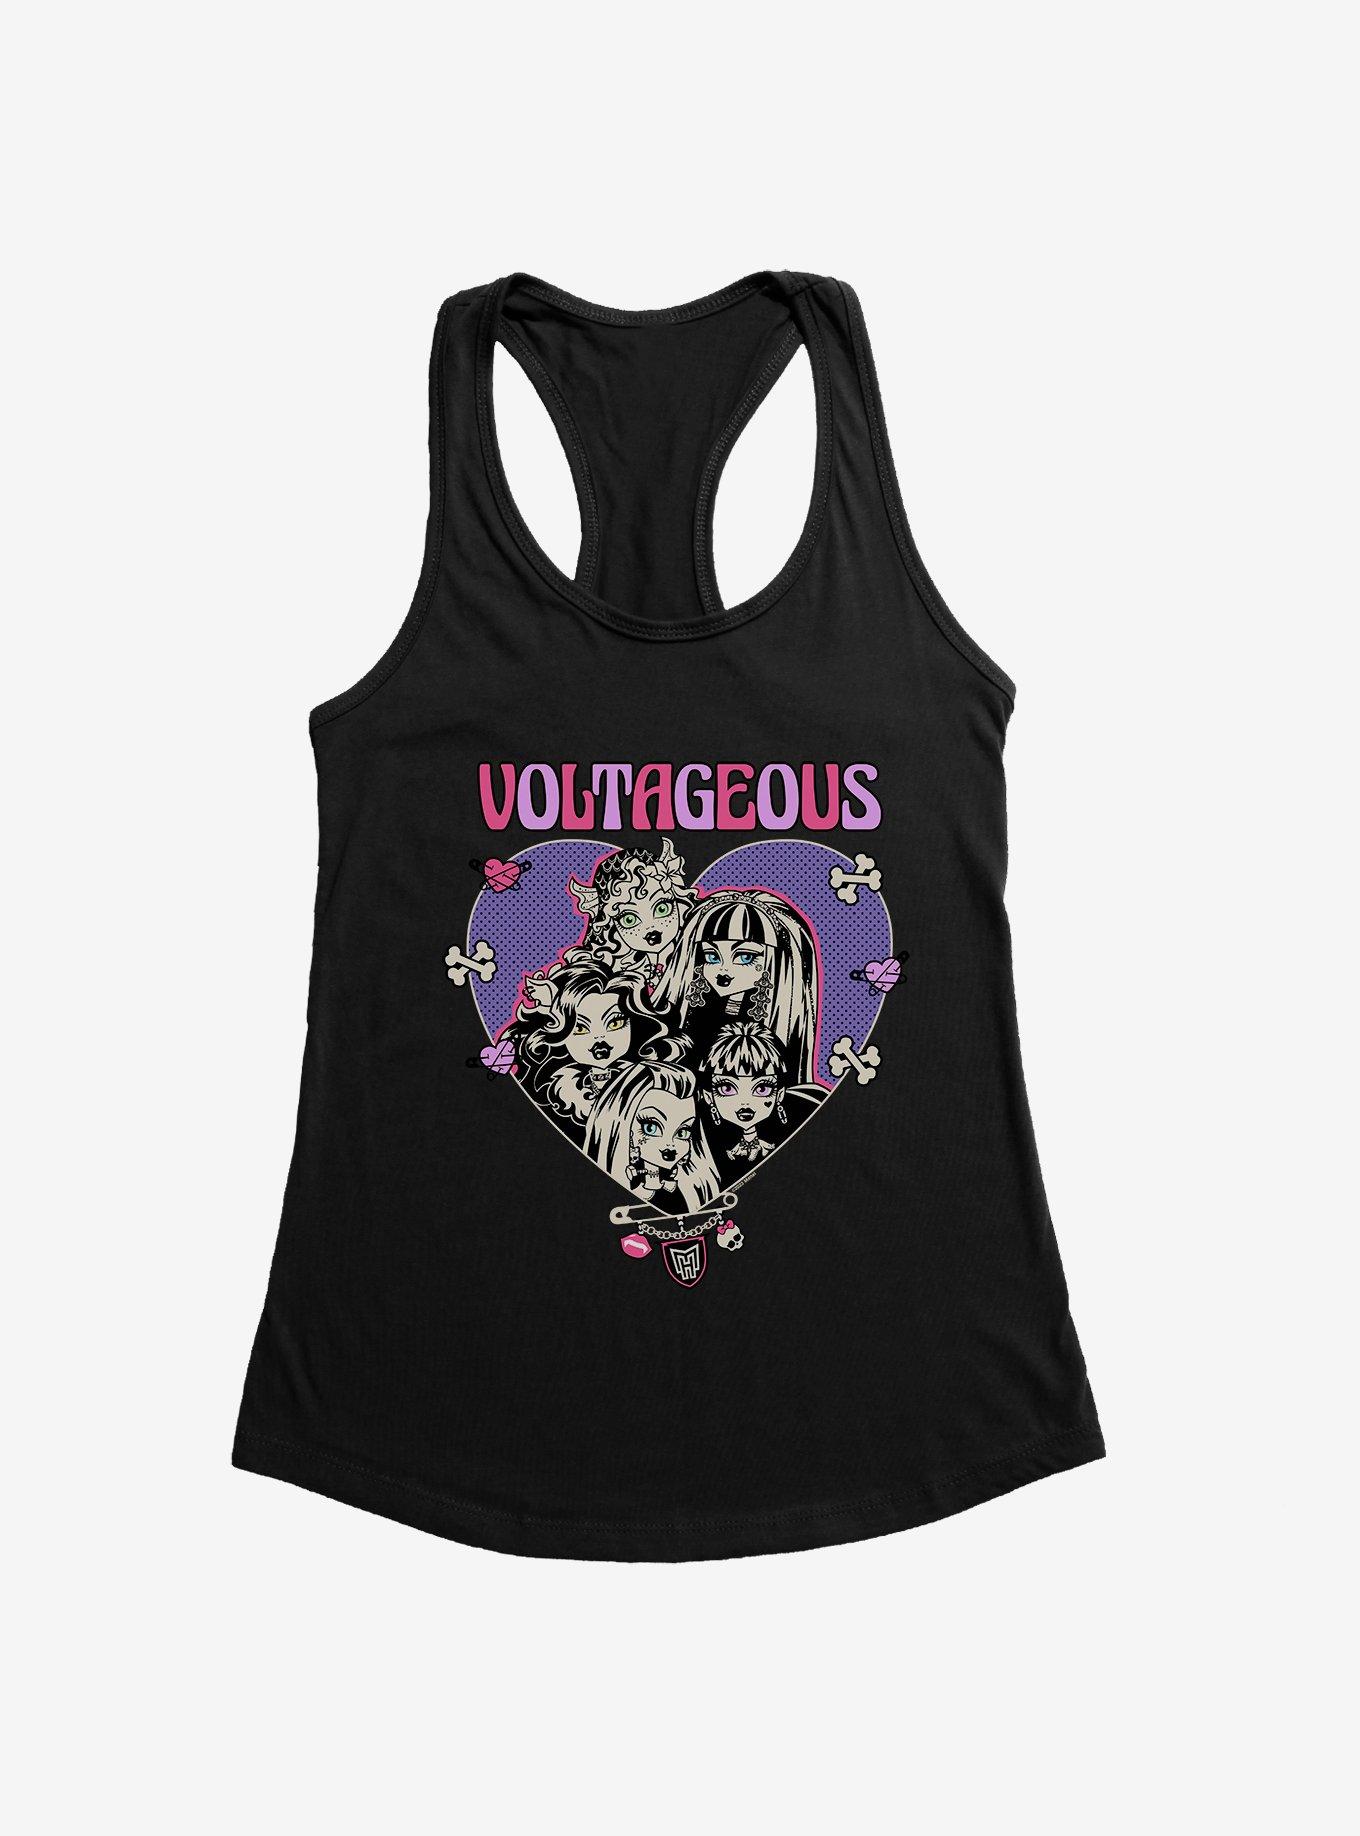 Monster High Voltageous Group Pose Girls Tank